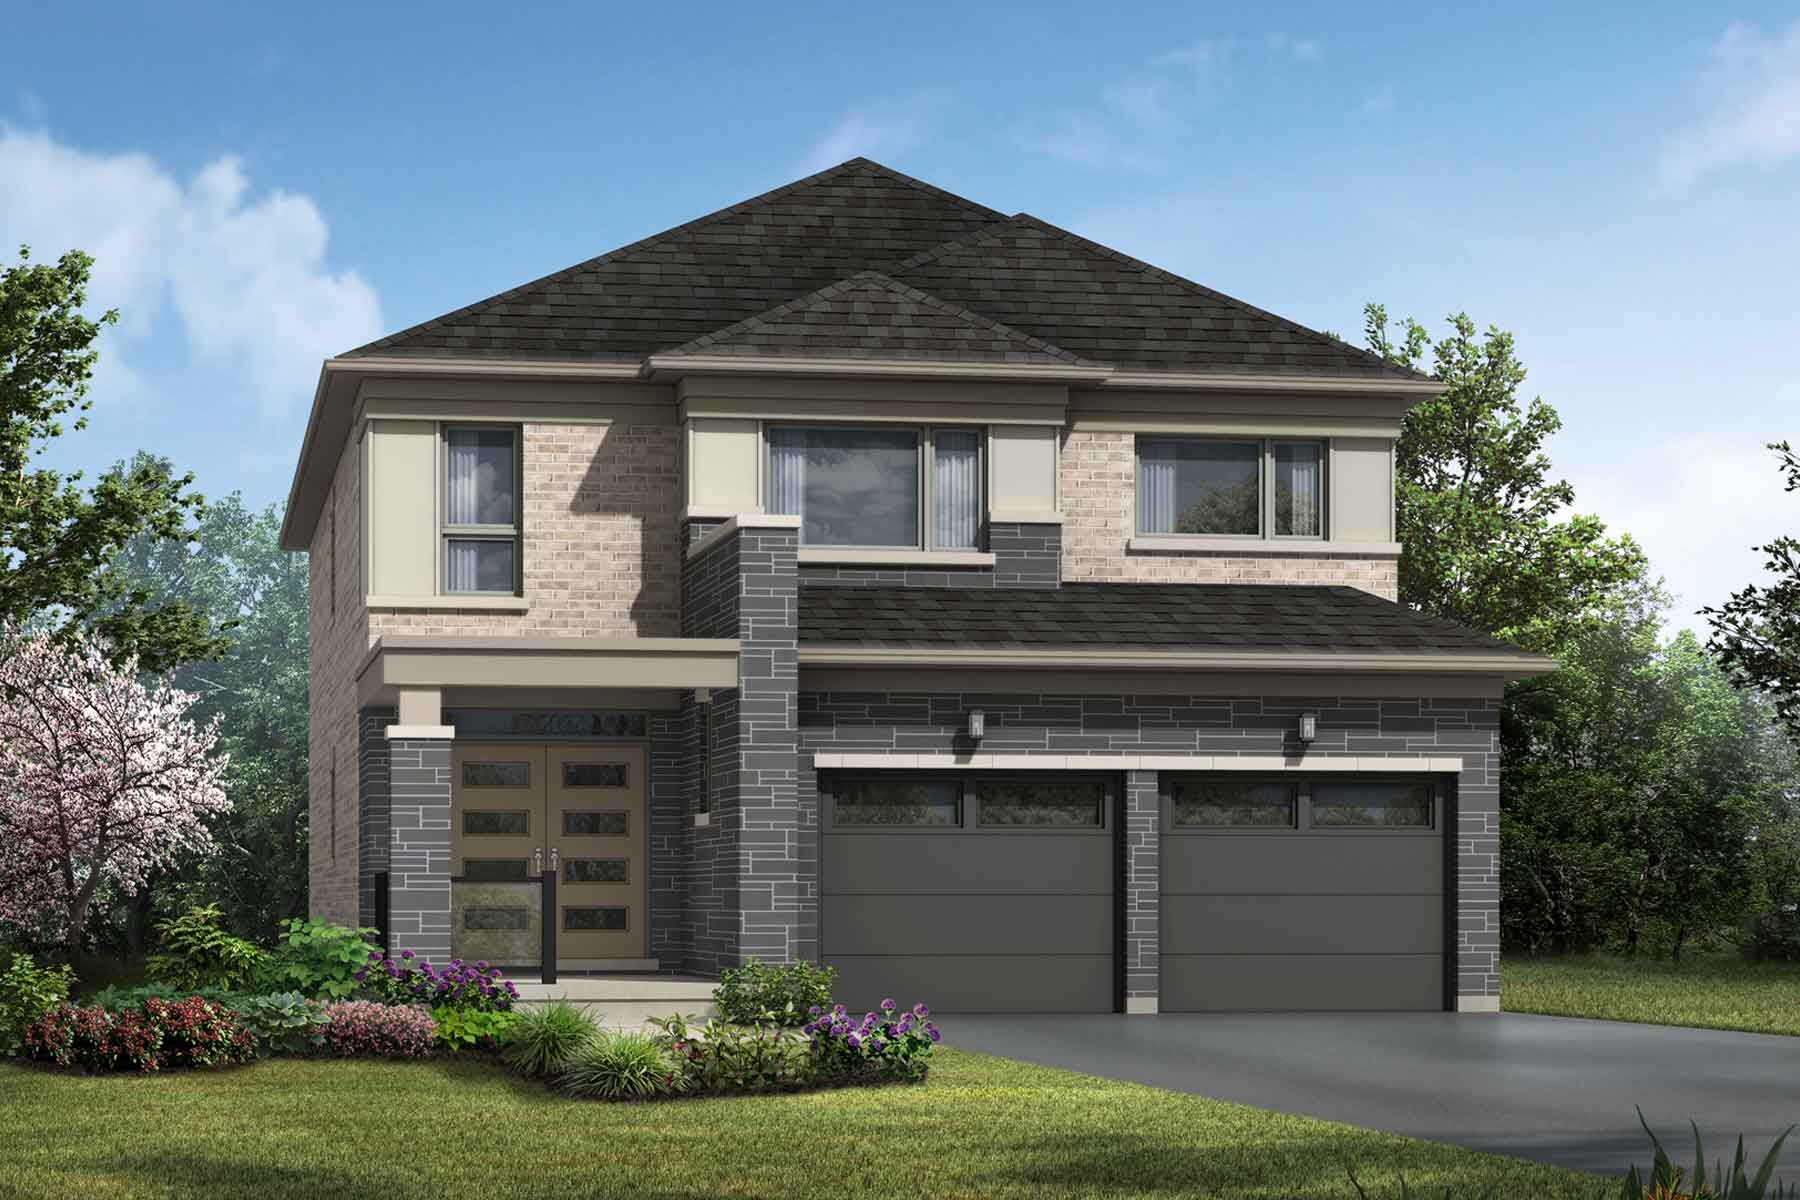 A Modern style single family home with a double car garage.